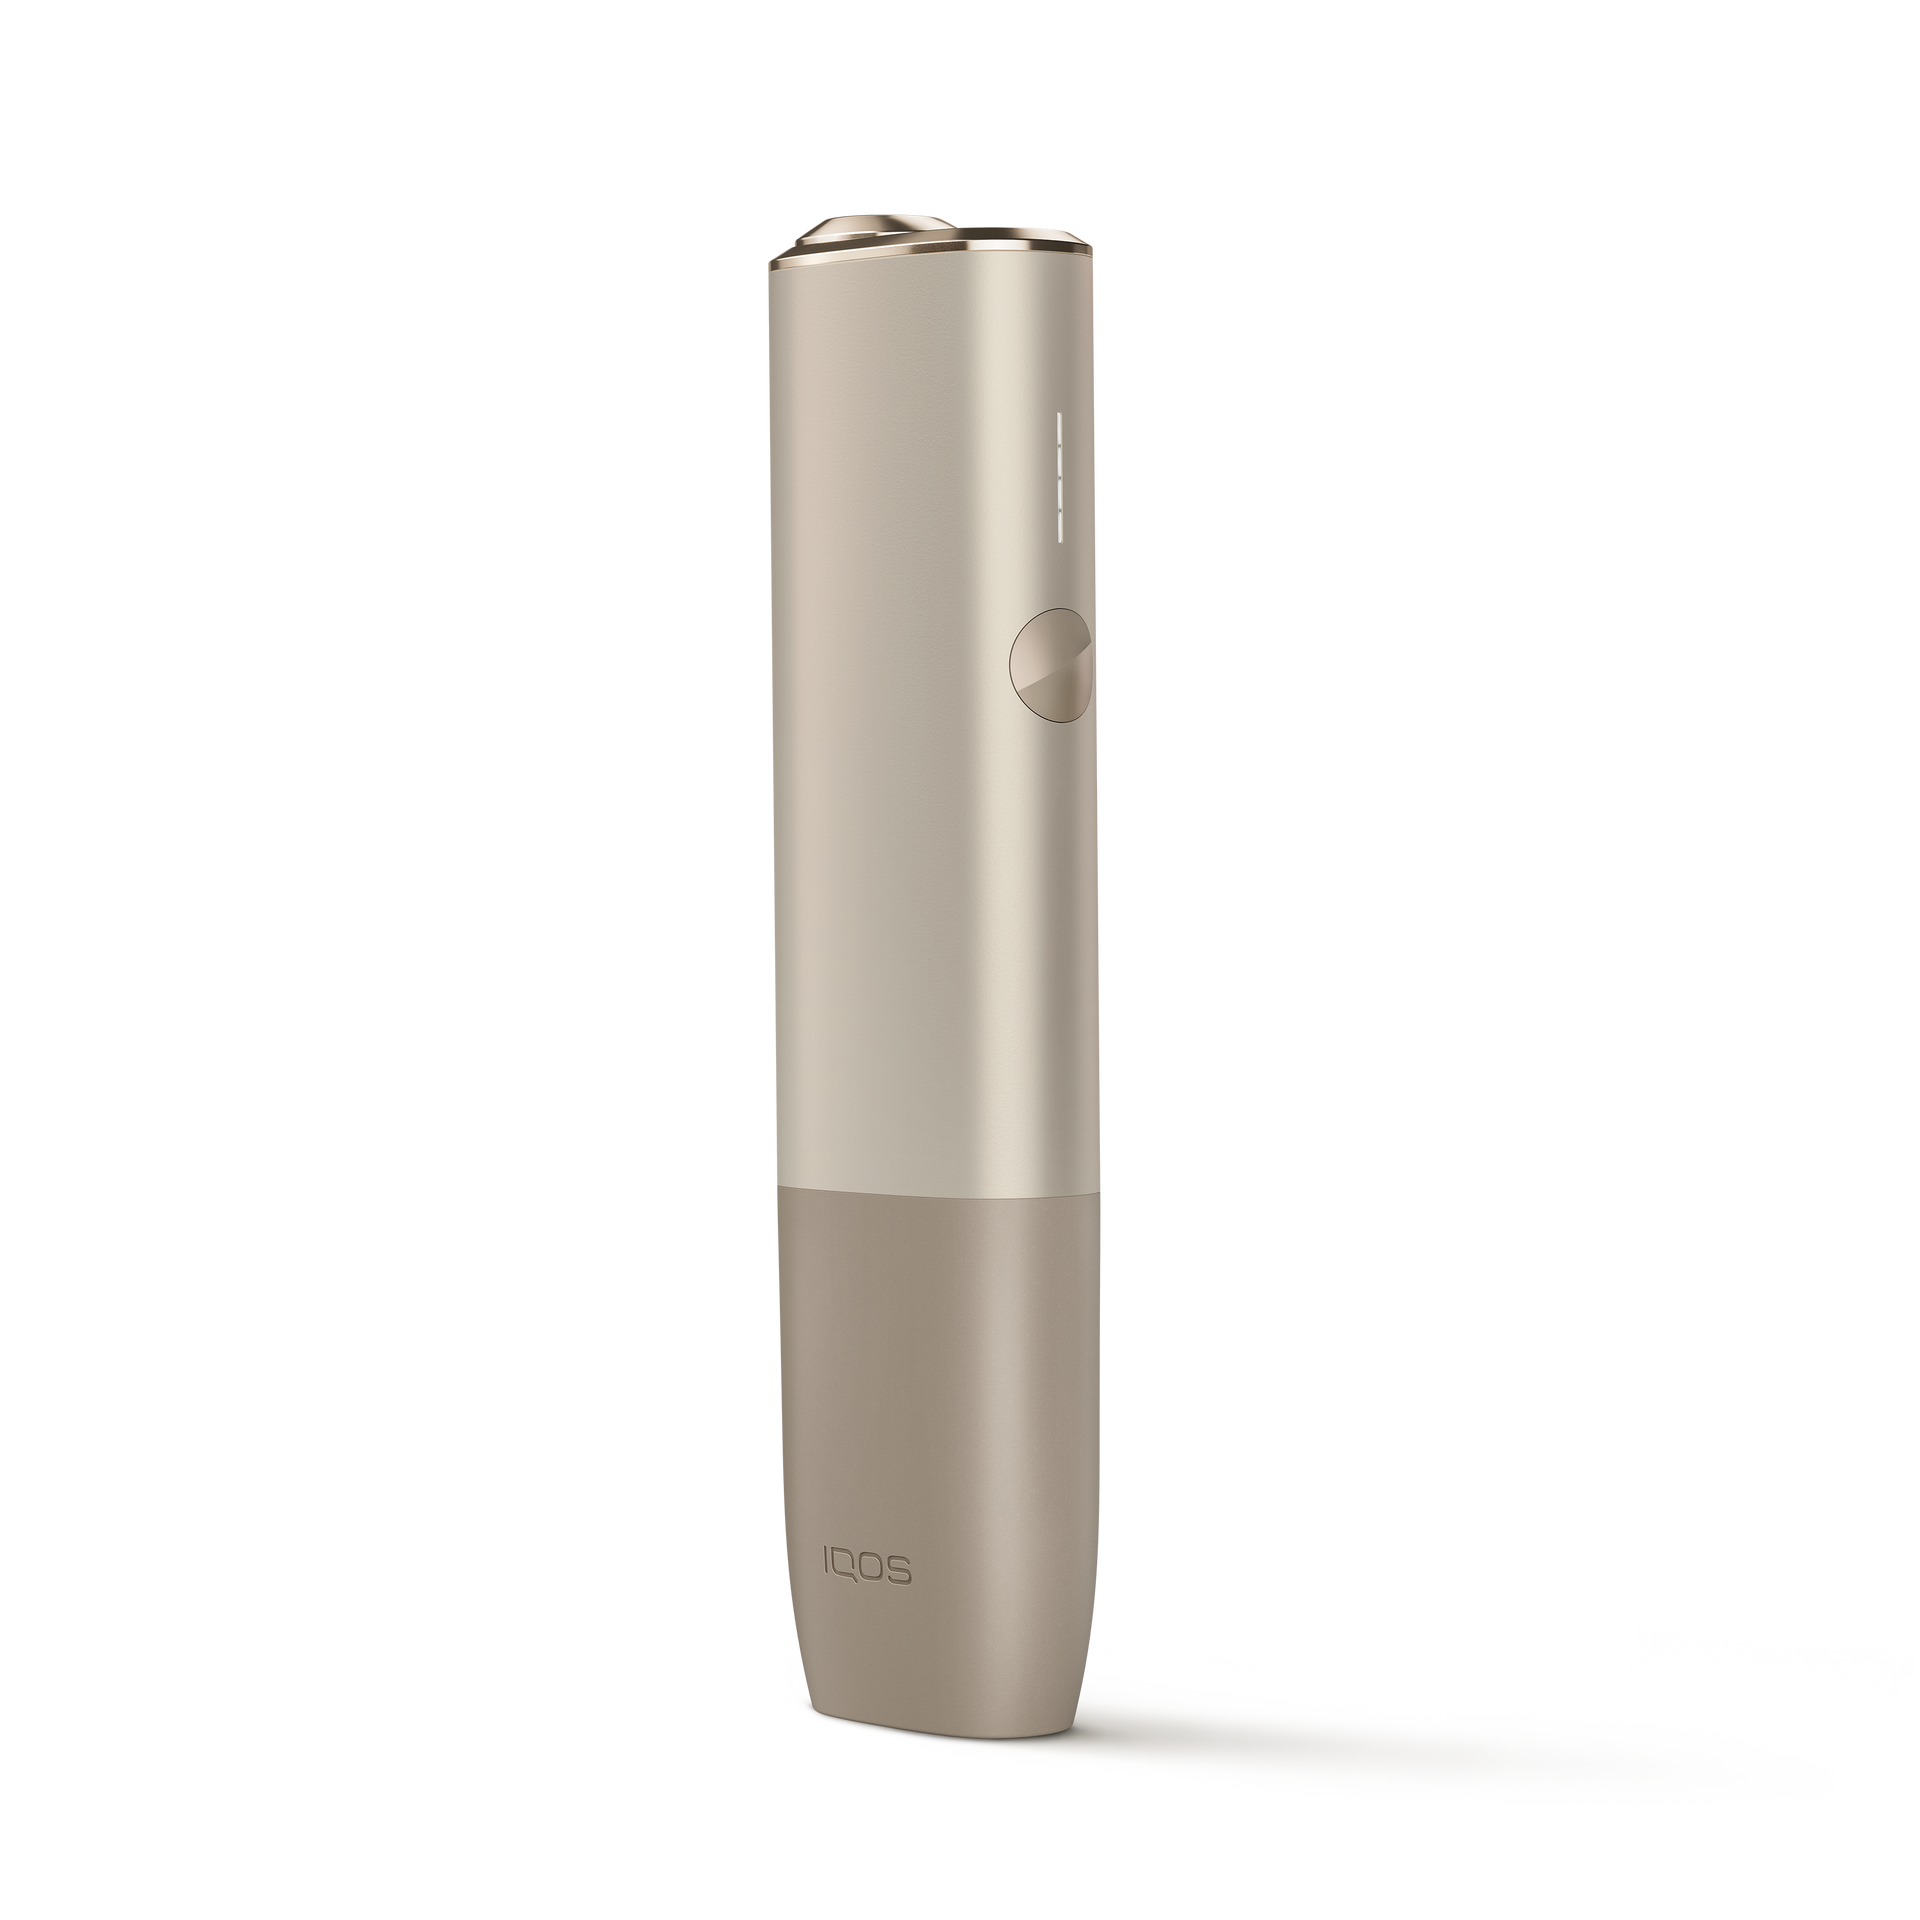 IQOS TEREA Sticks from £5.40 Per Pack